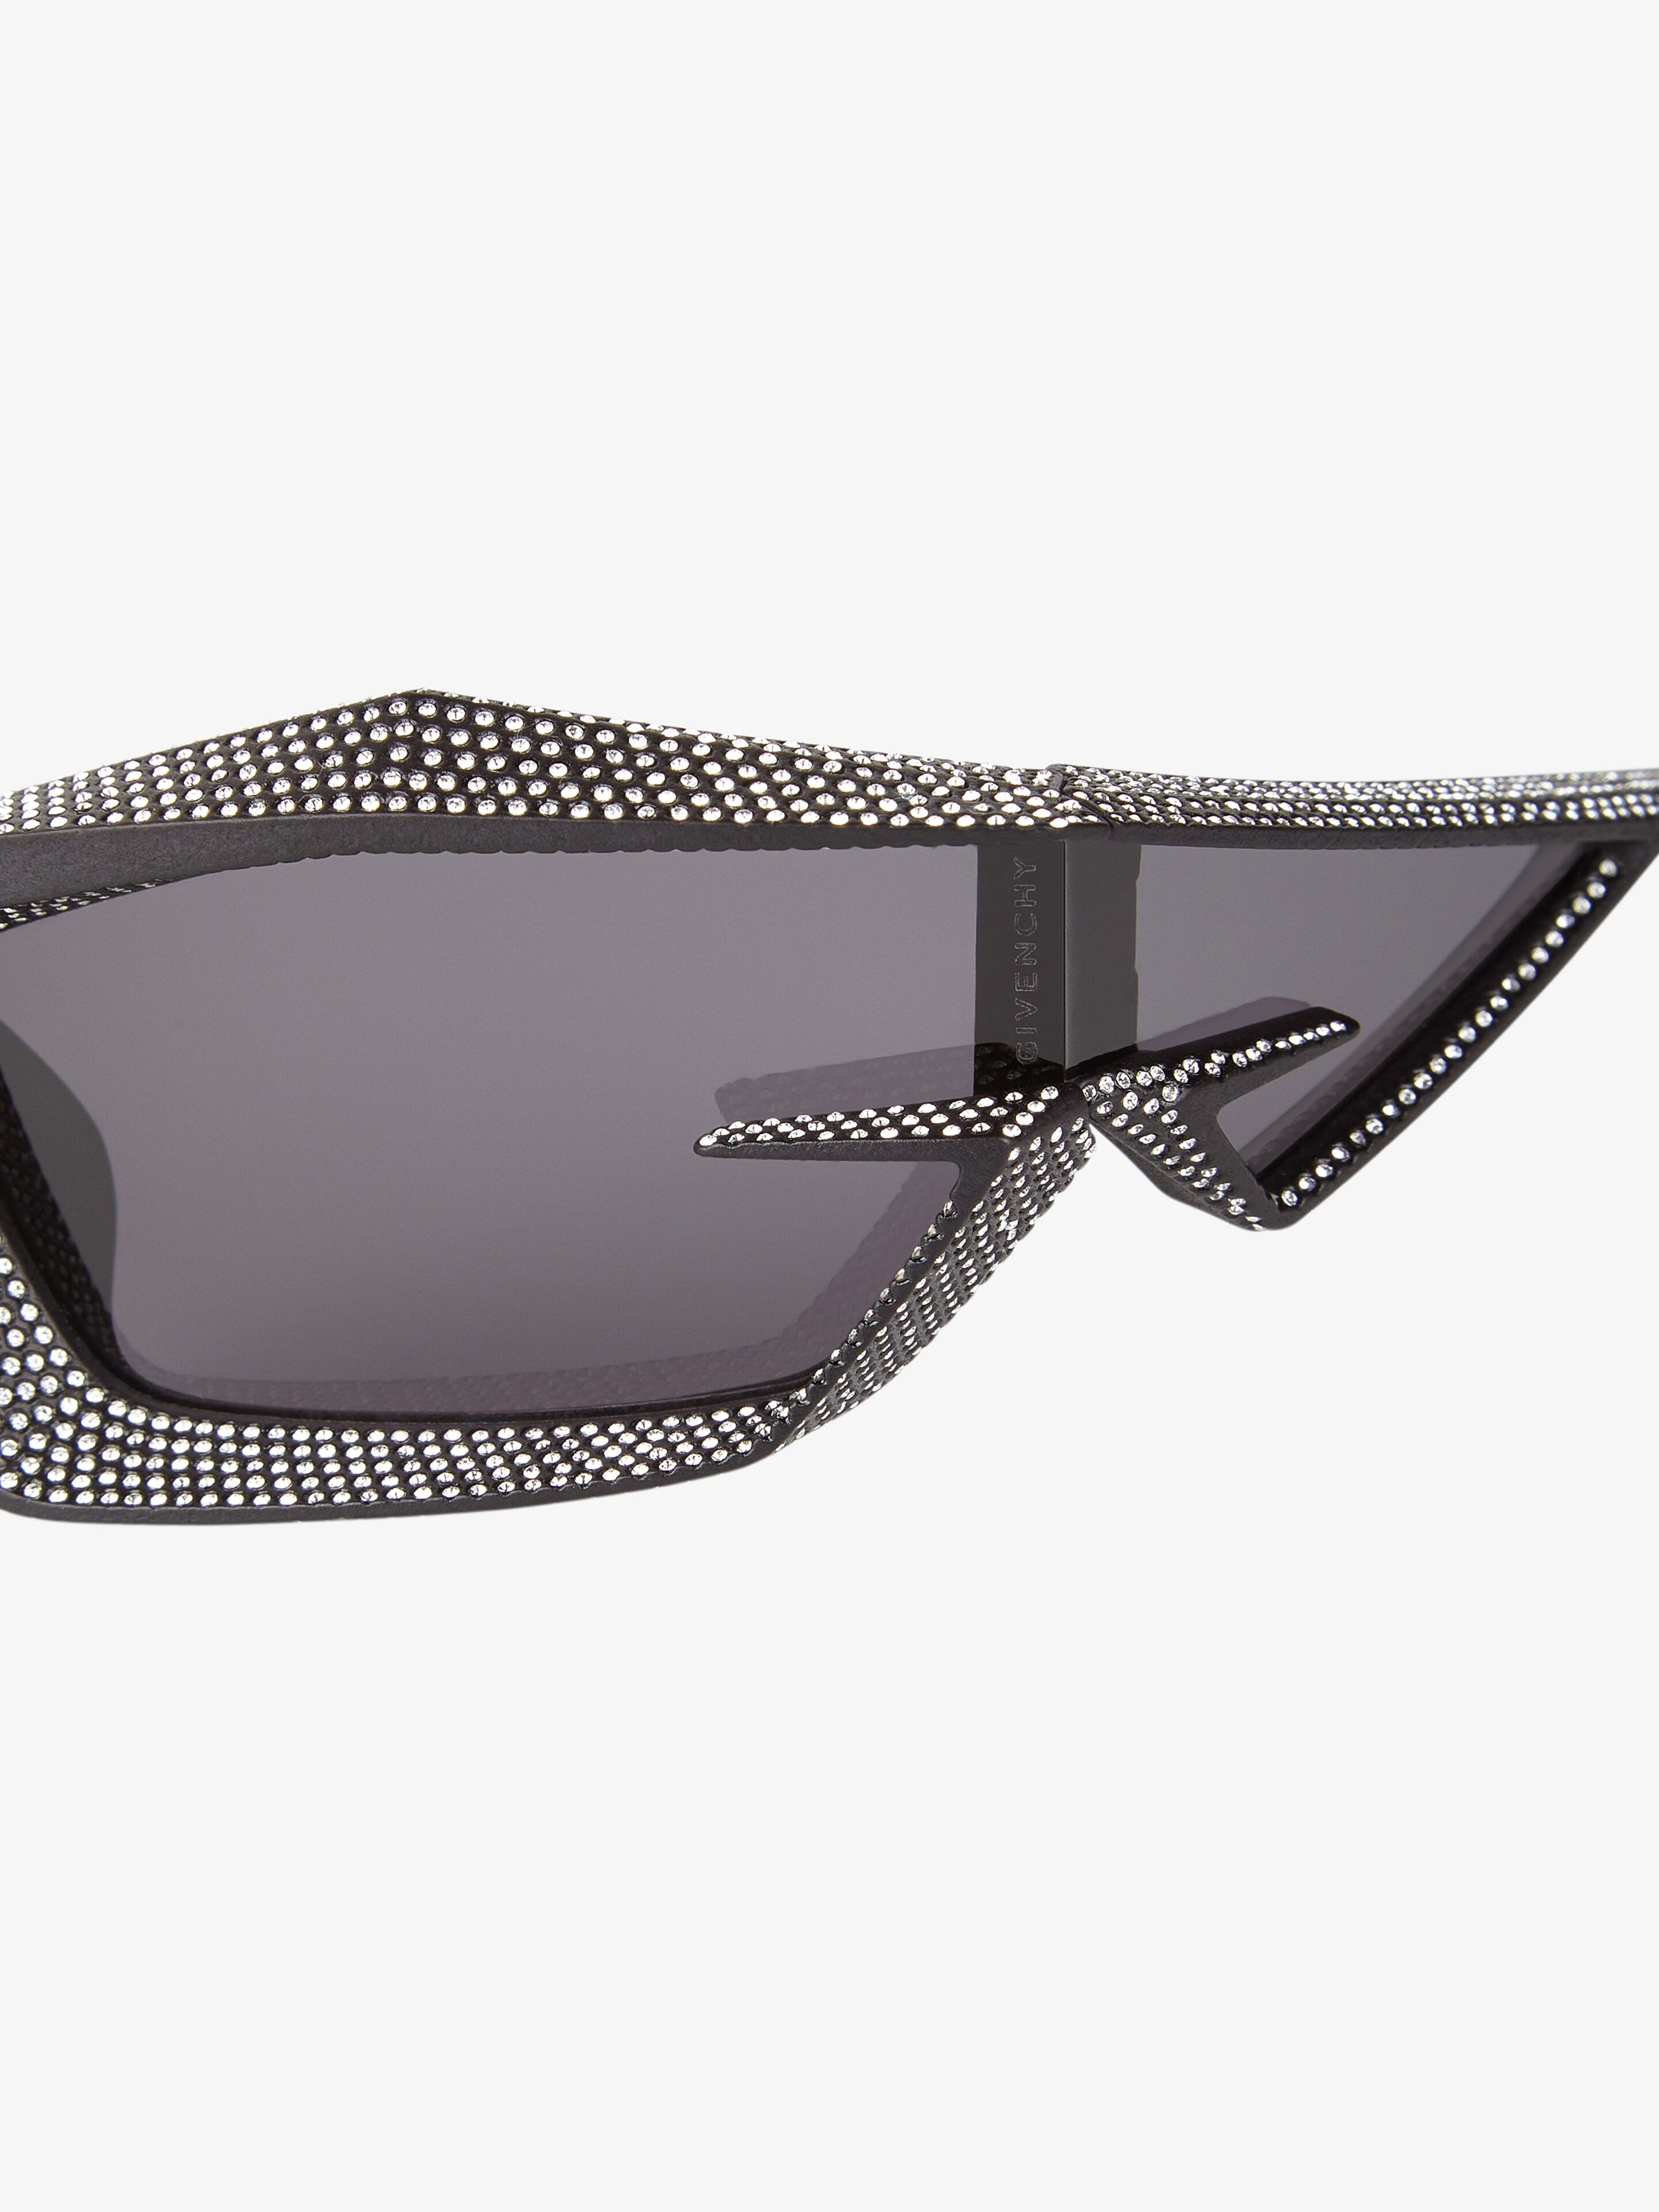 GIV CUT UNISEX SUNGLASSES IN METAL WITH CRYSTALS - 2